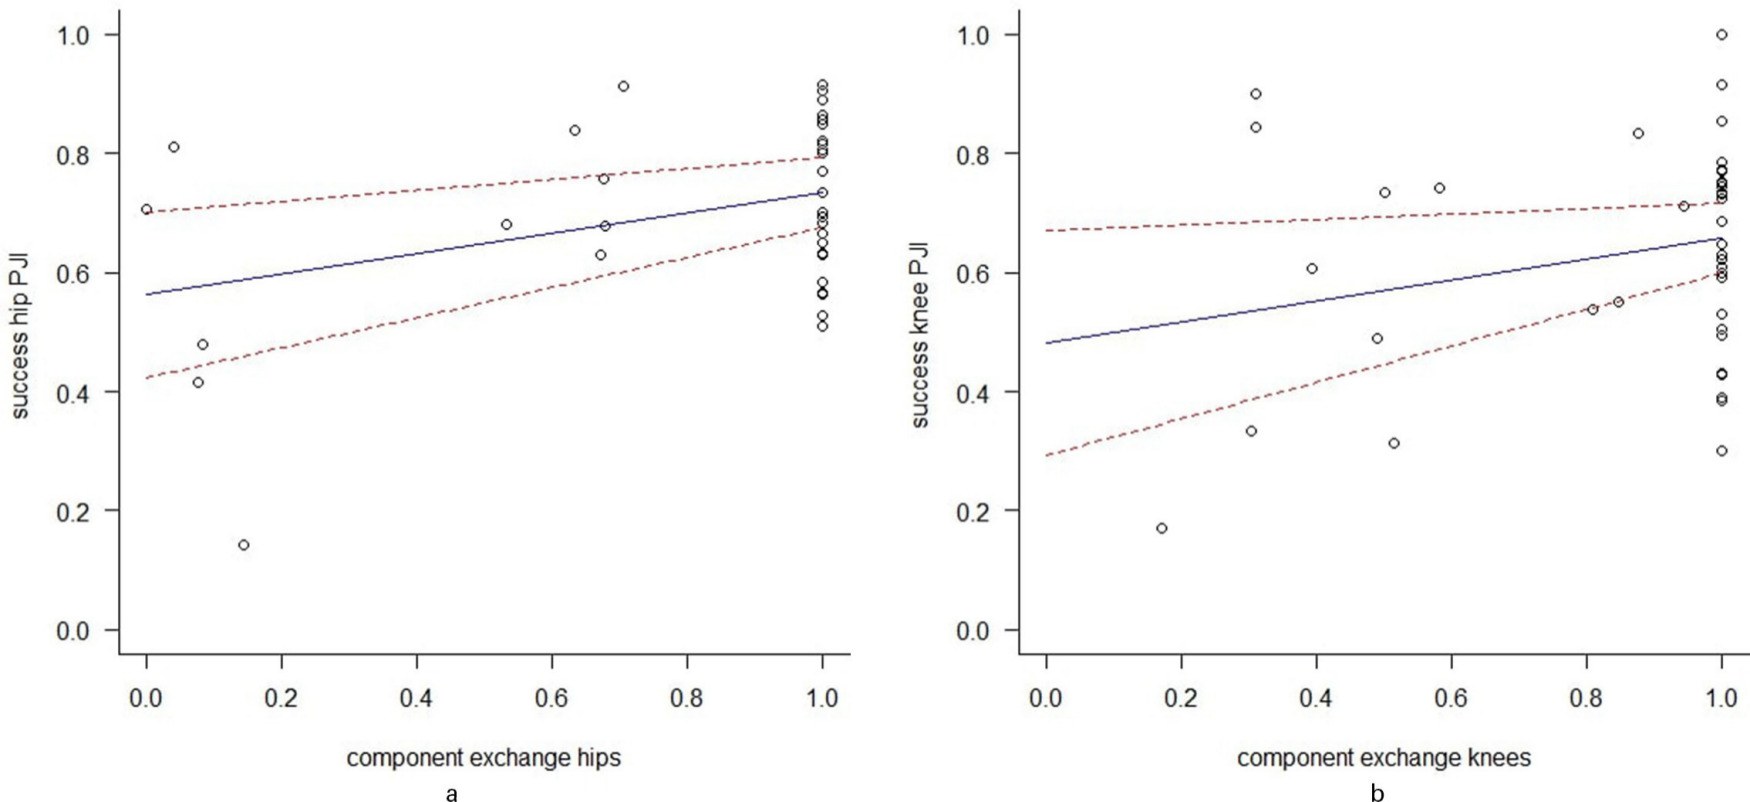 Fig. 2 
            a) Scatterplot showing the association between exchange of modular components and successful outcome of debridement, antibiotics, and implant retention (DAIR) for hip periprosthetic joint infection (PJI). The results from the meta-regression are presented as a blue line with red 95% confidence interval (CI). Both variables are presented as proportions of all included hips in the study cohort. b) Scatterplot showing the association between exchange of modular components and successful outcome of DAIR for knee PJI. The results from the meta-regression are presented as a blue line with red 95% CI. Both variables are presented as proportions of all included knees in the study cohort.
          